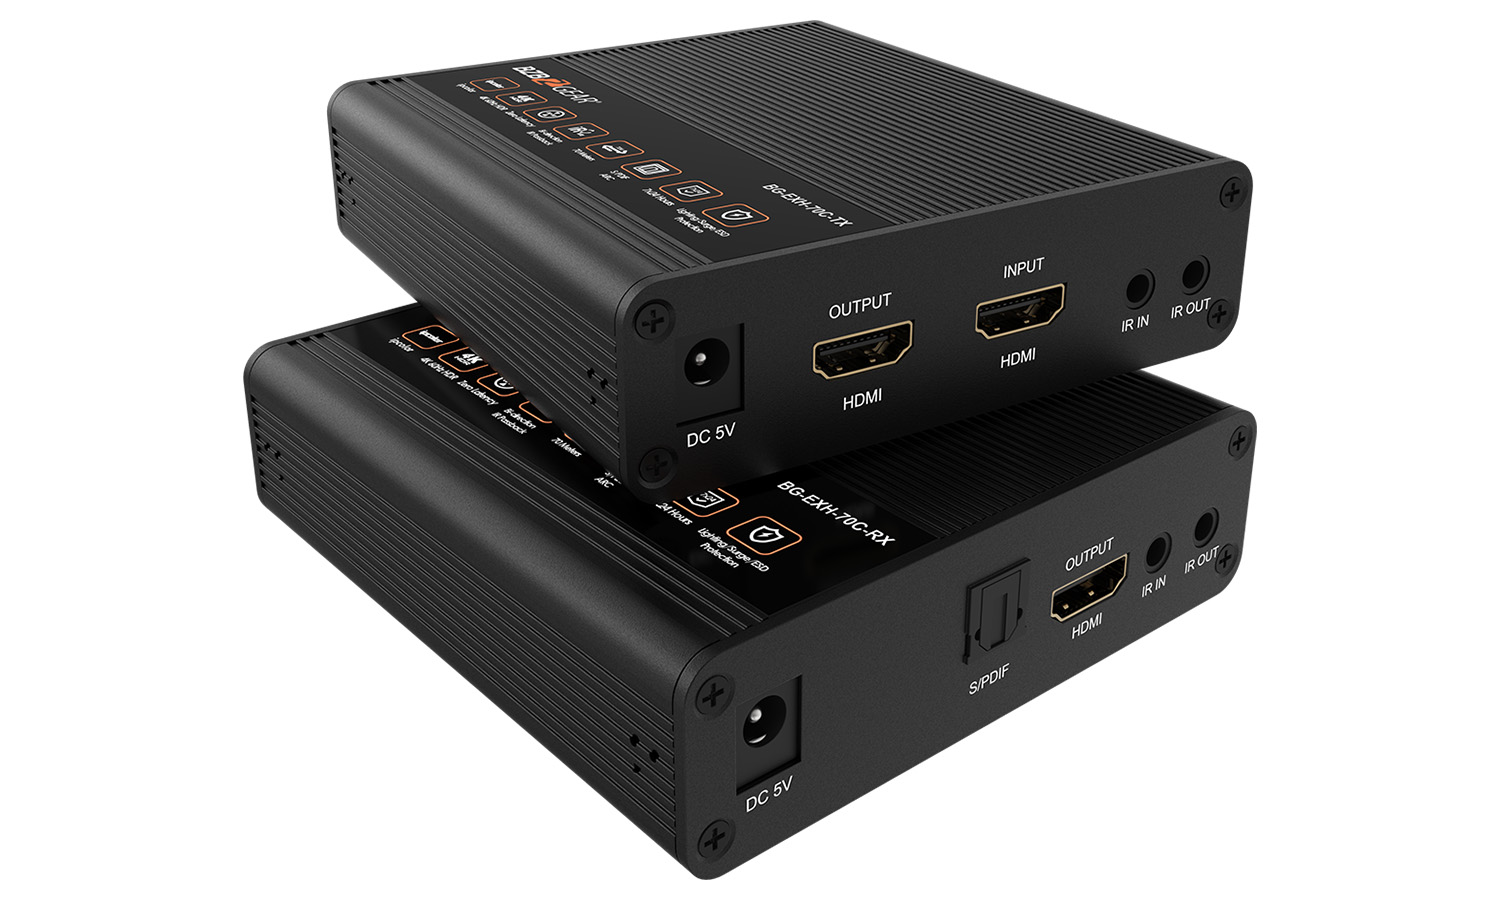 BZBGEAR BG-EXH-70C 4K 18Gbps UHD HDMI Extender Over Category 5e/6/7 Cable with 2-Way IR/Audio De-embedding up to 230ft